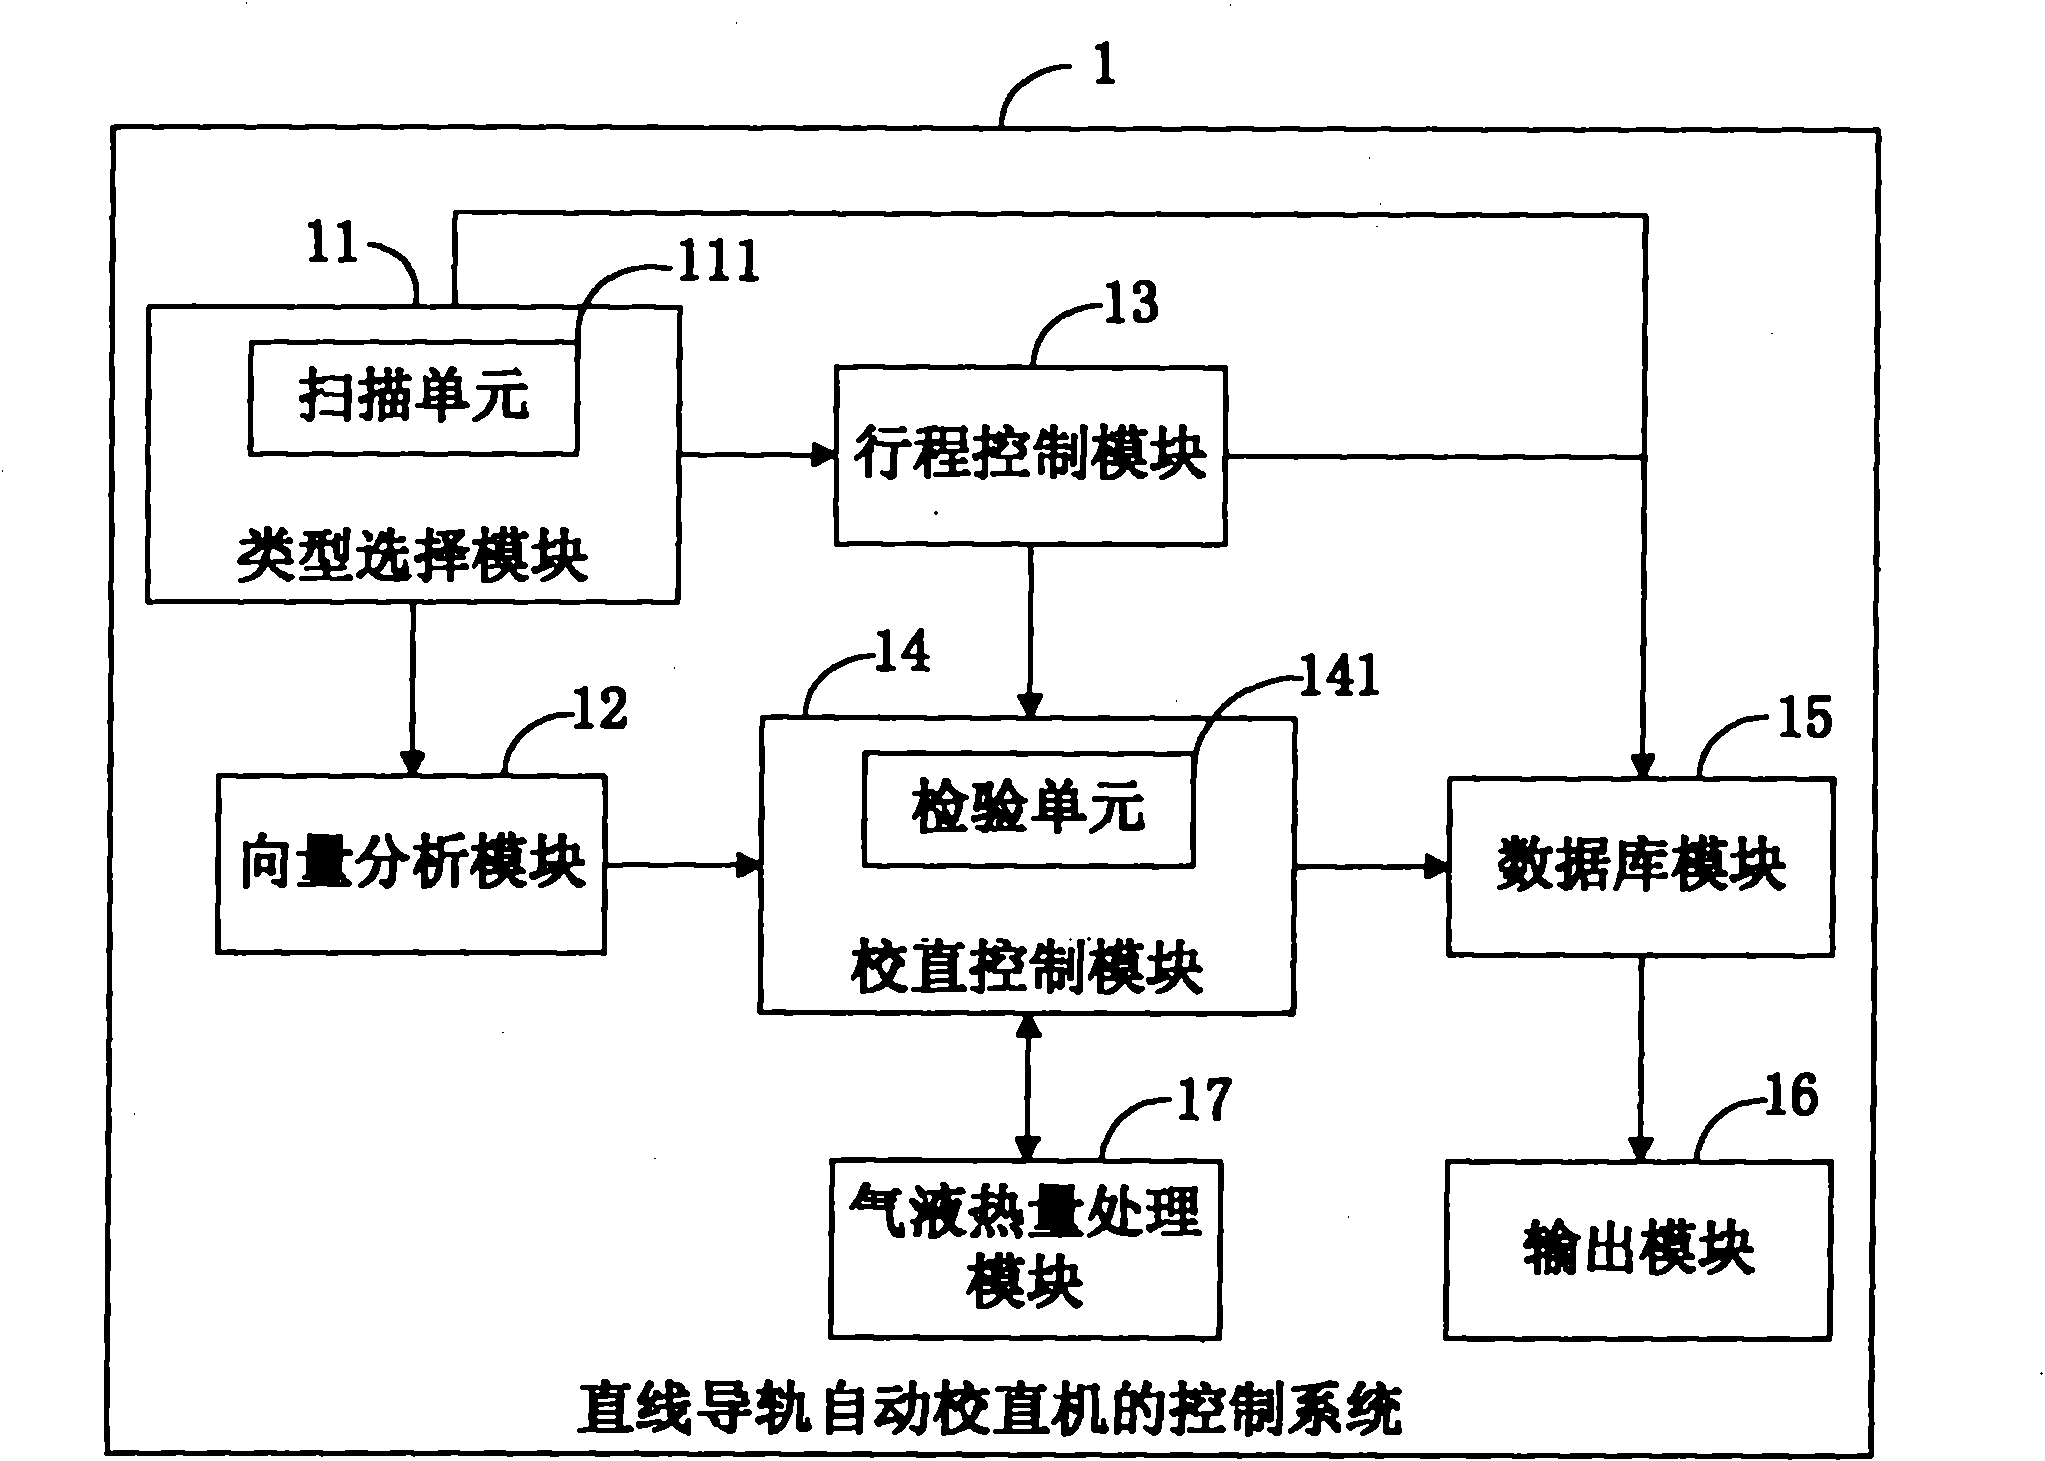 Control system of automatic straightener for linear guide rails